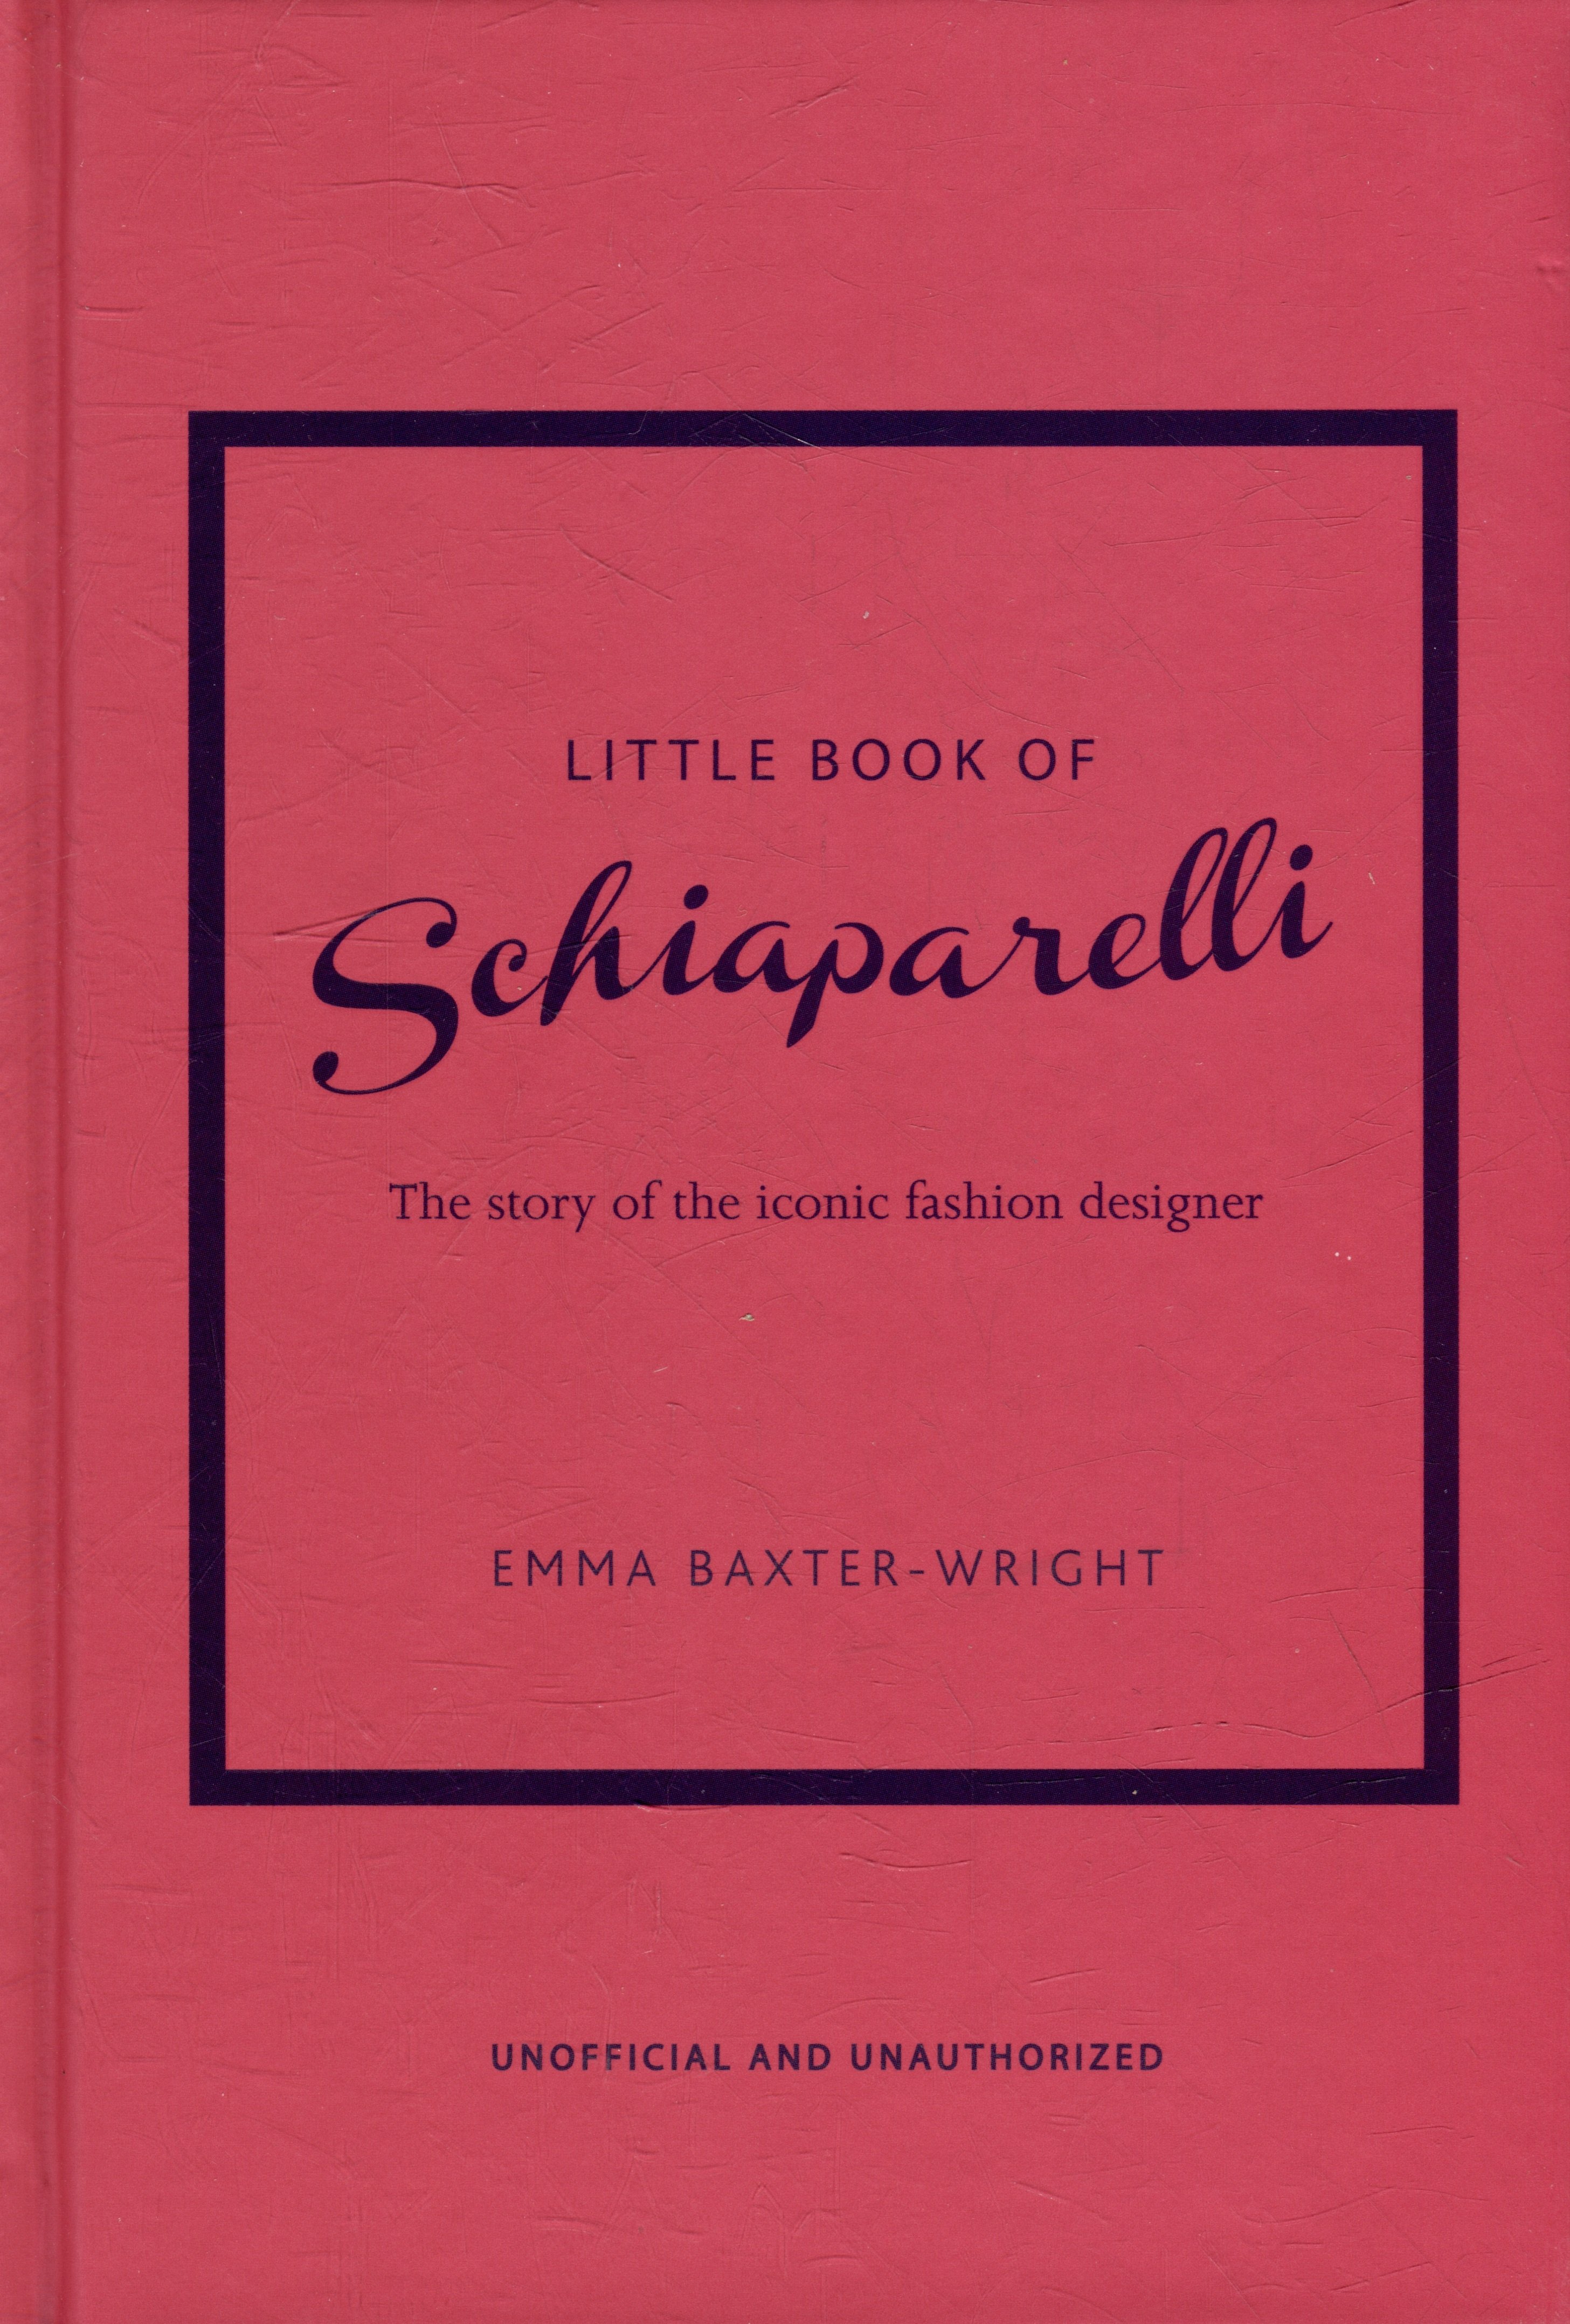 The Little Book of Schiaparelli: The Story of the Iconic Fashion House